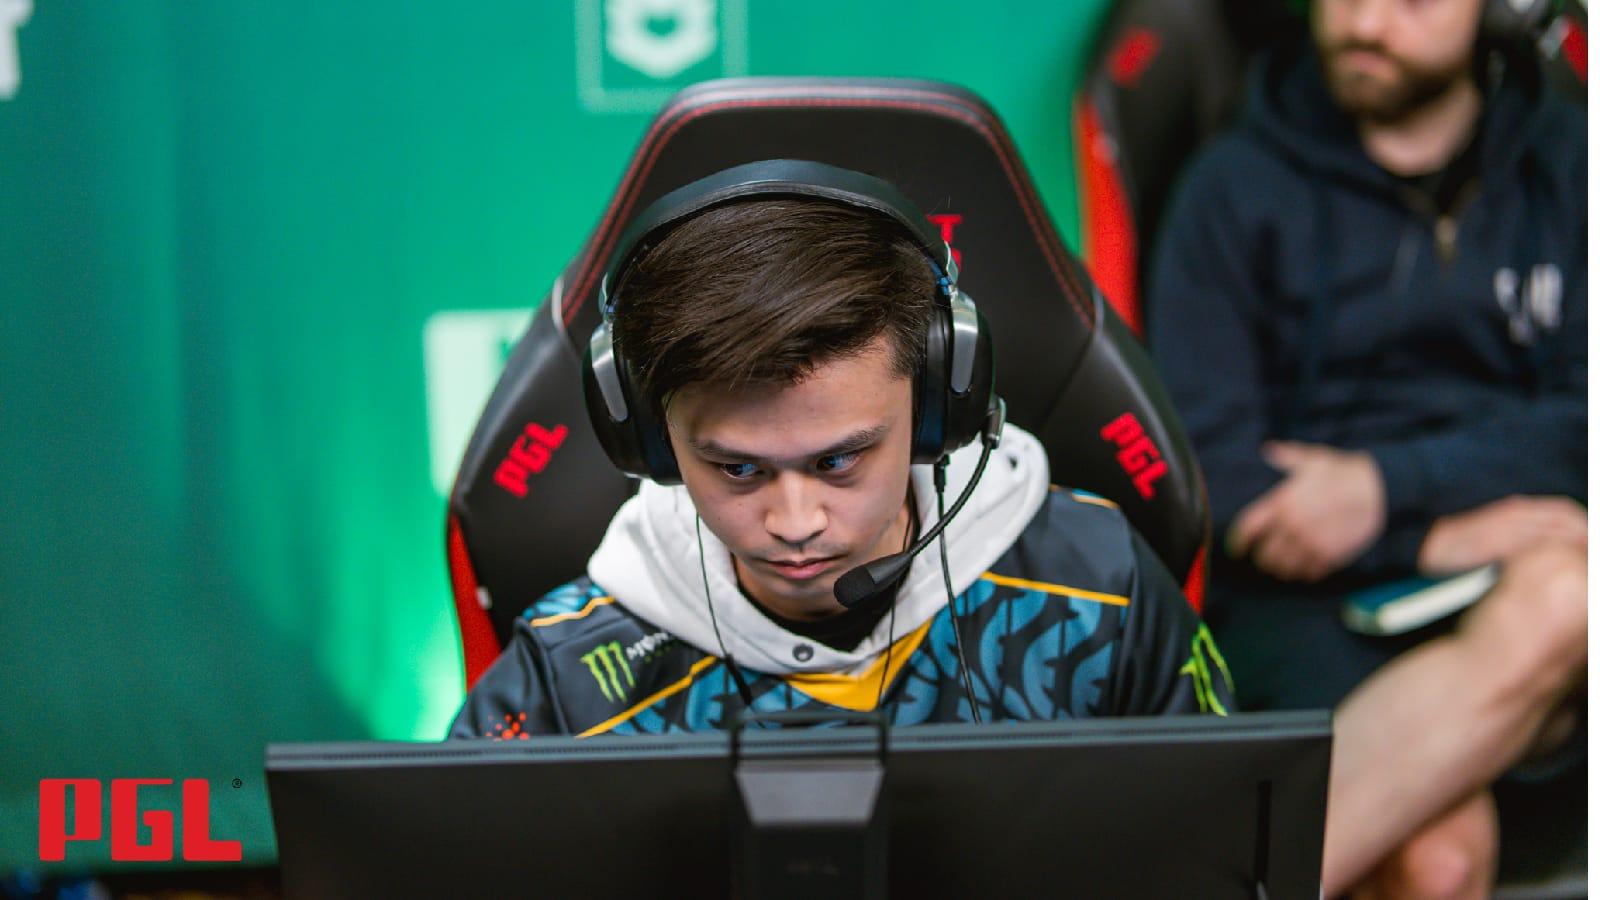 stewie2k competing in CS:GO for Evil Geniuses